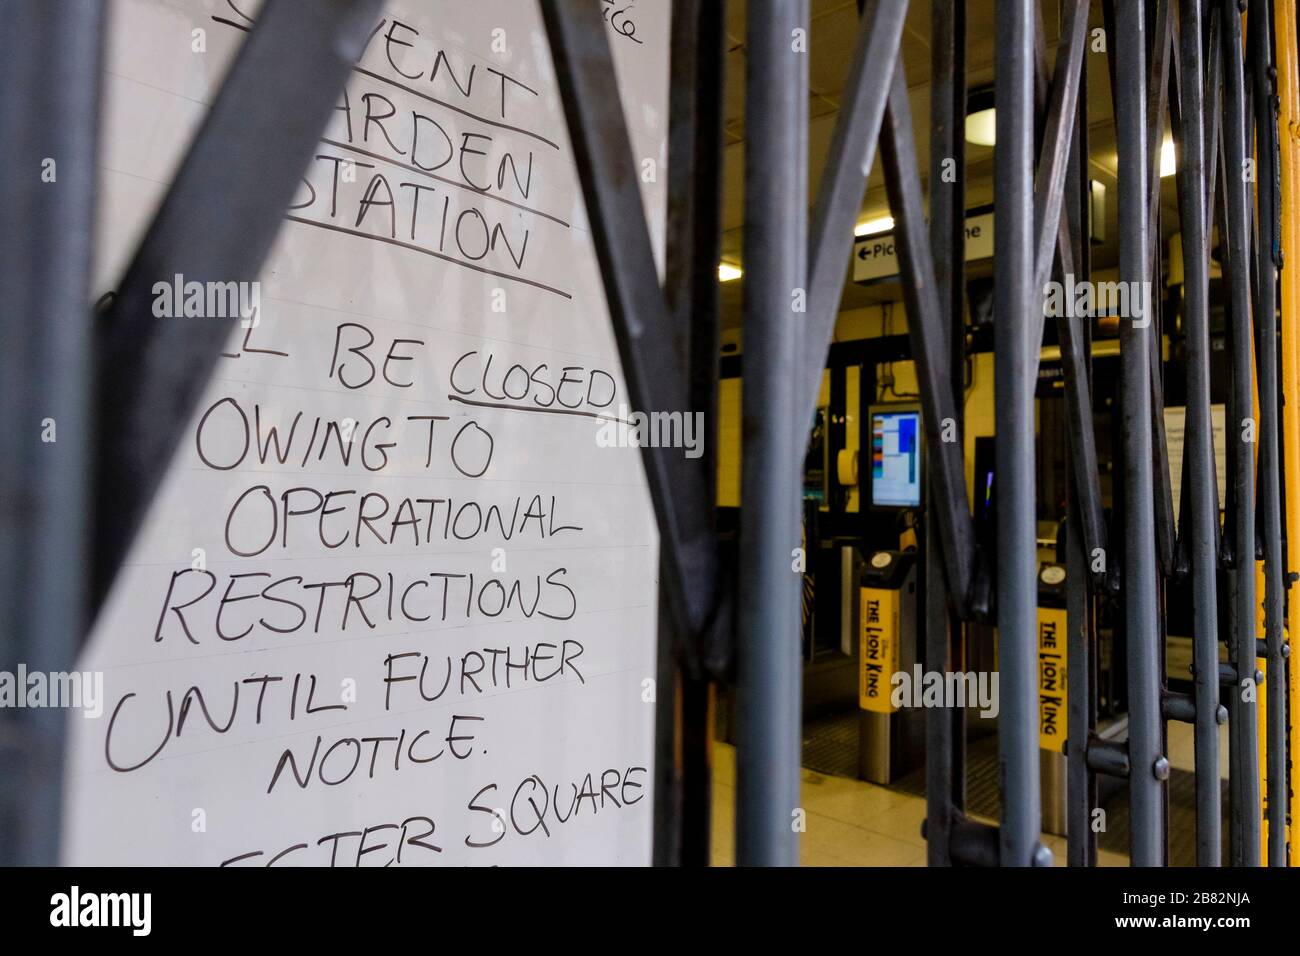 London, UK. 19 March 2020. A notice at Covent Garden Underground station informs the public that the station is closed until further notice owing to operational restrictions. Stock Photo